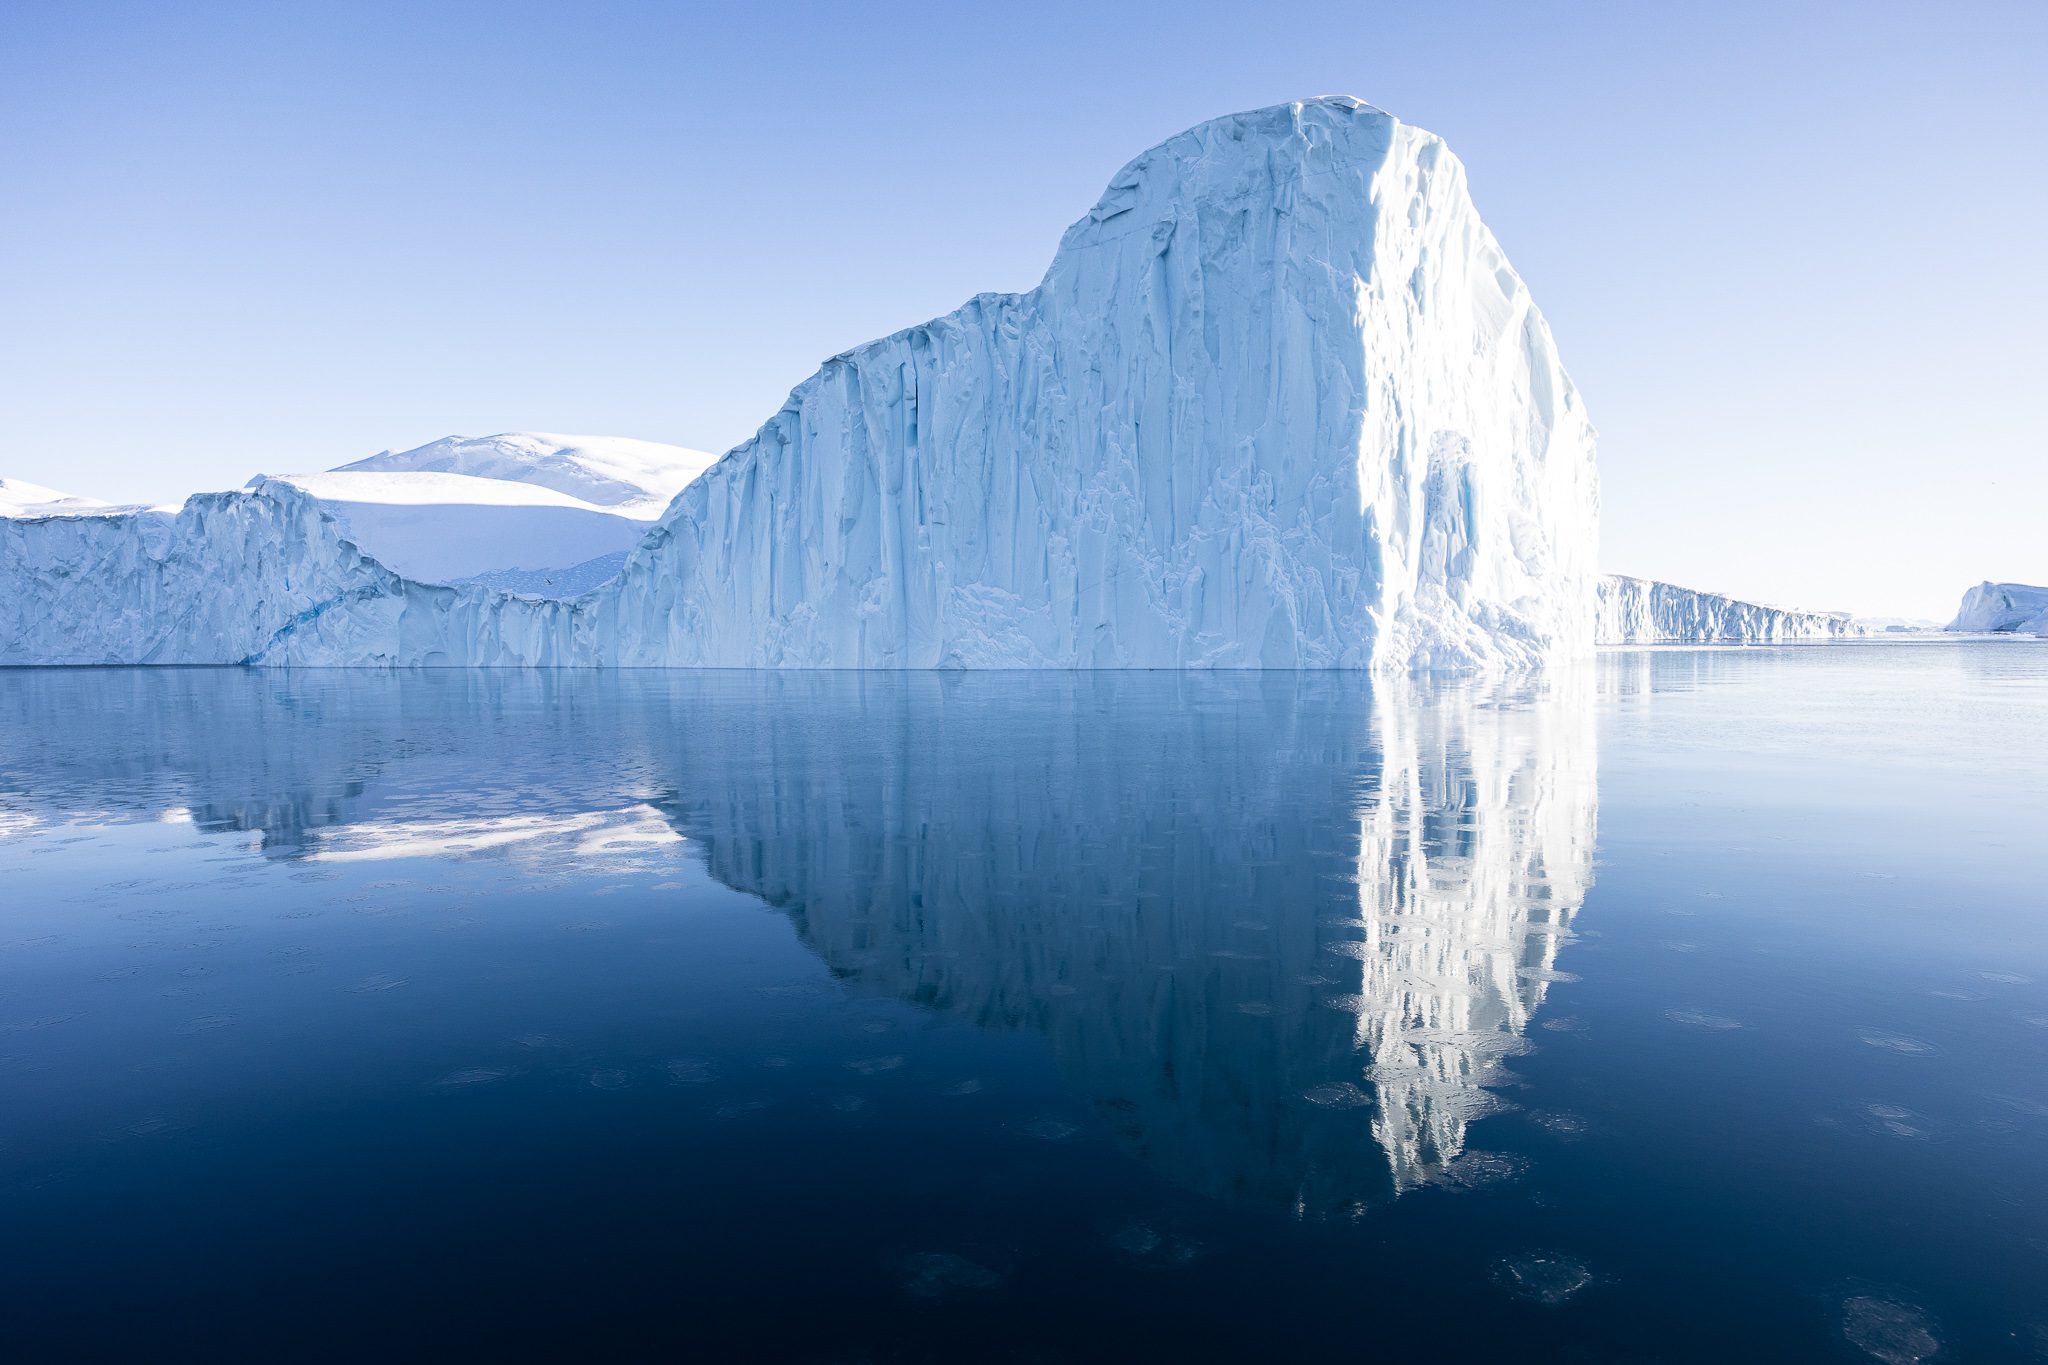 Greenland – Discovering Deep Winter in Ilulissat